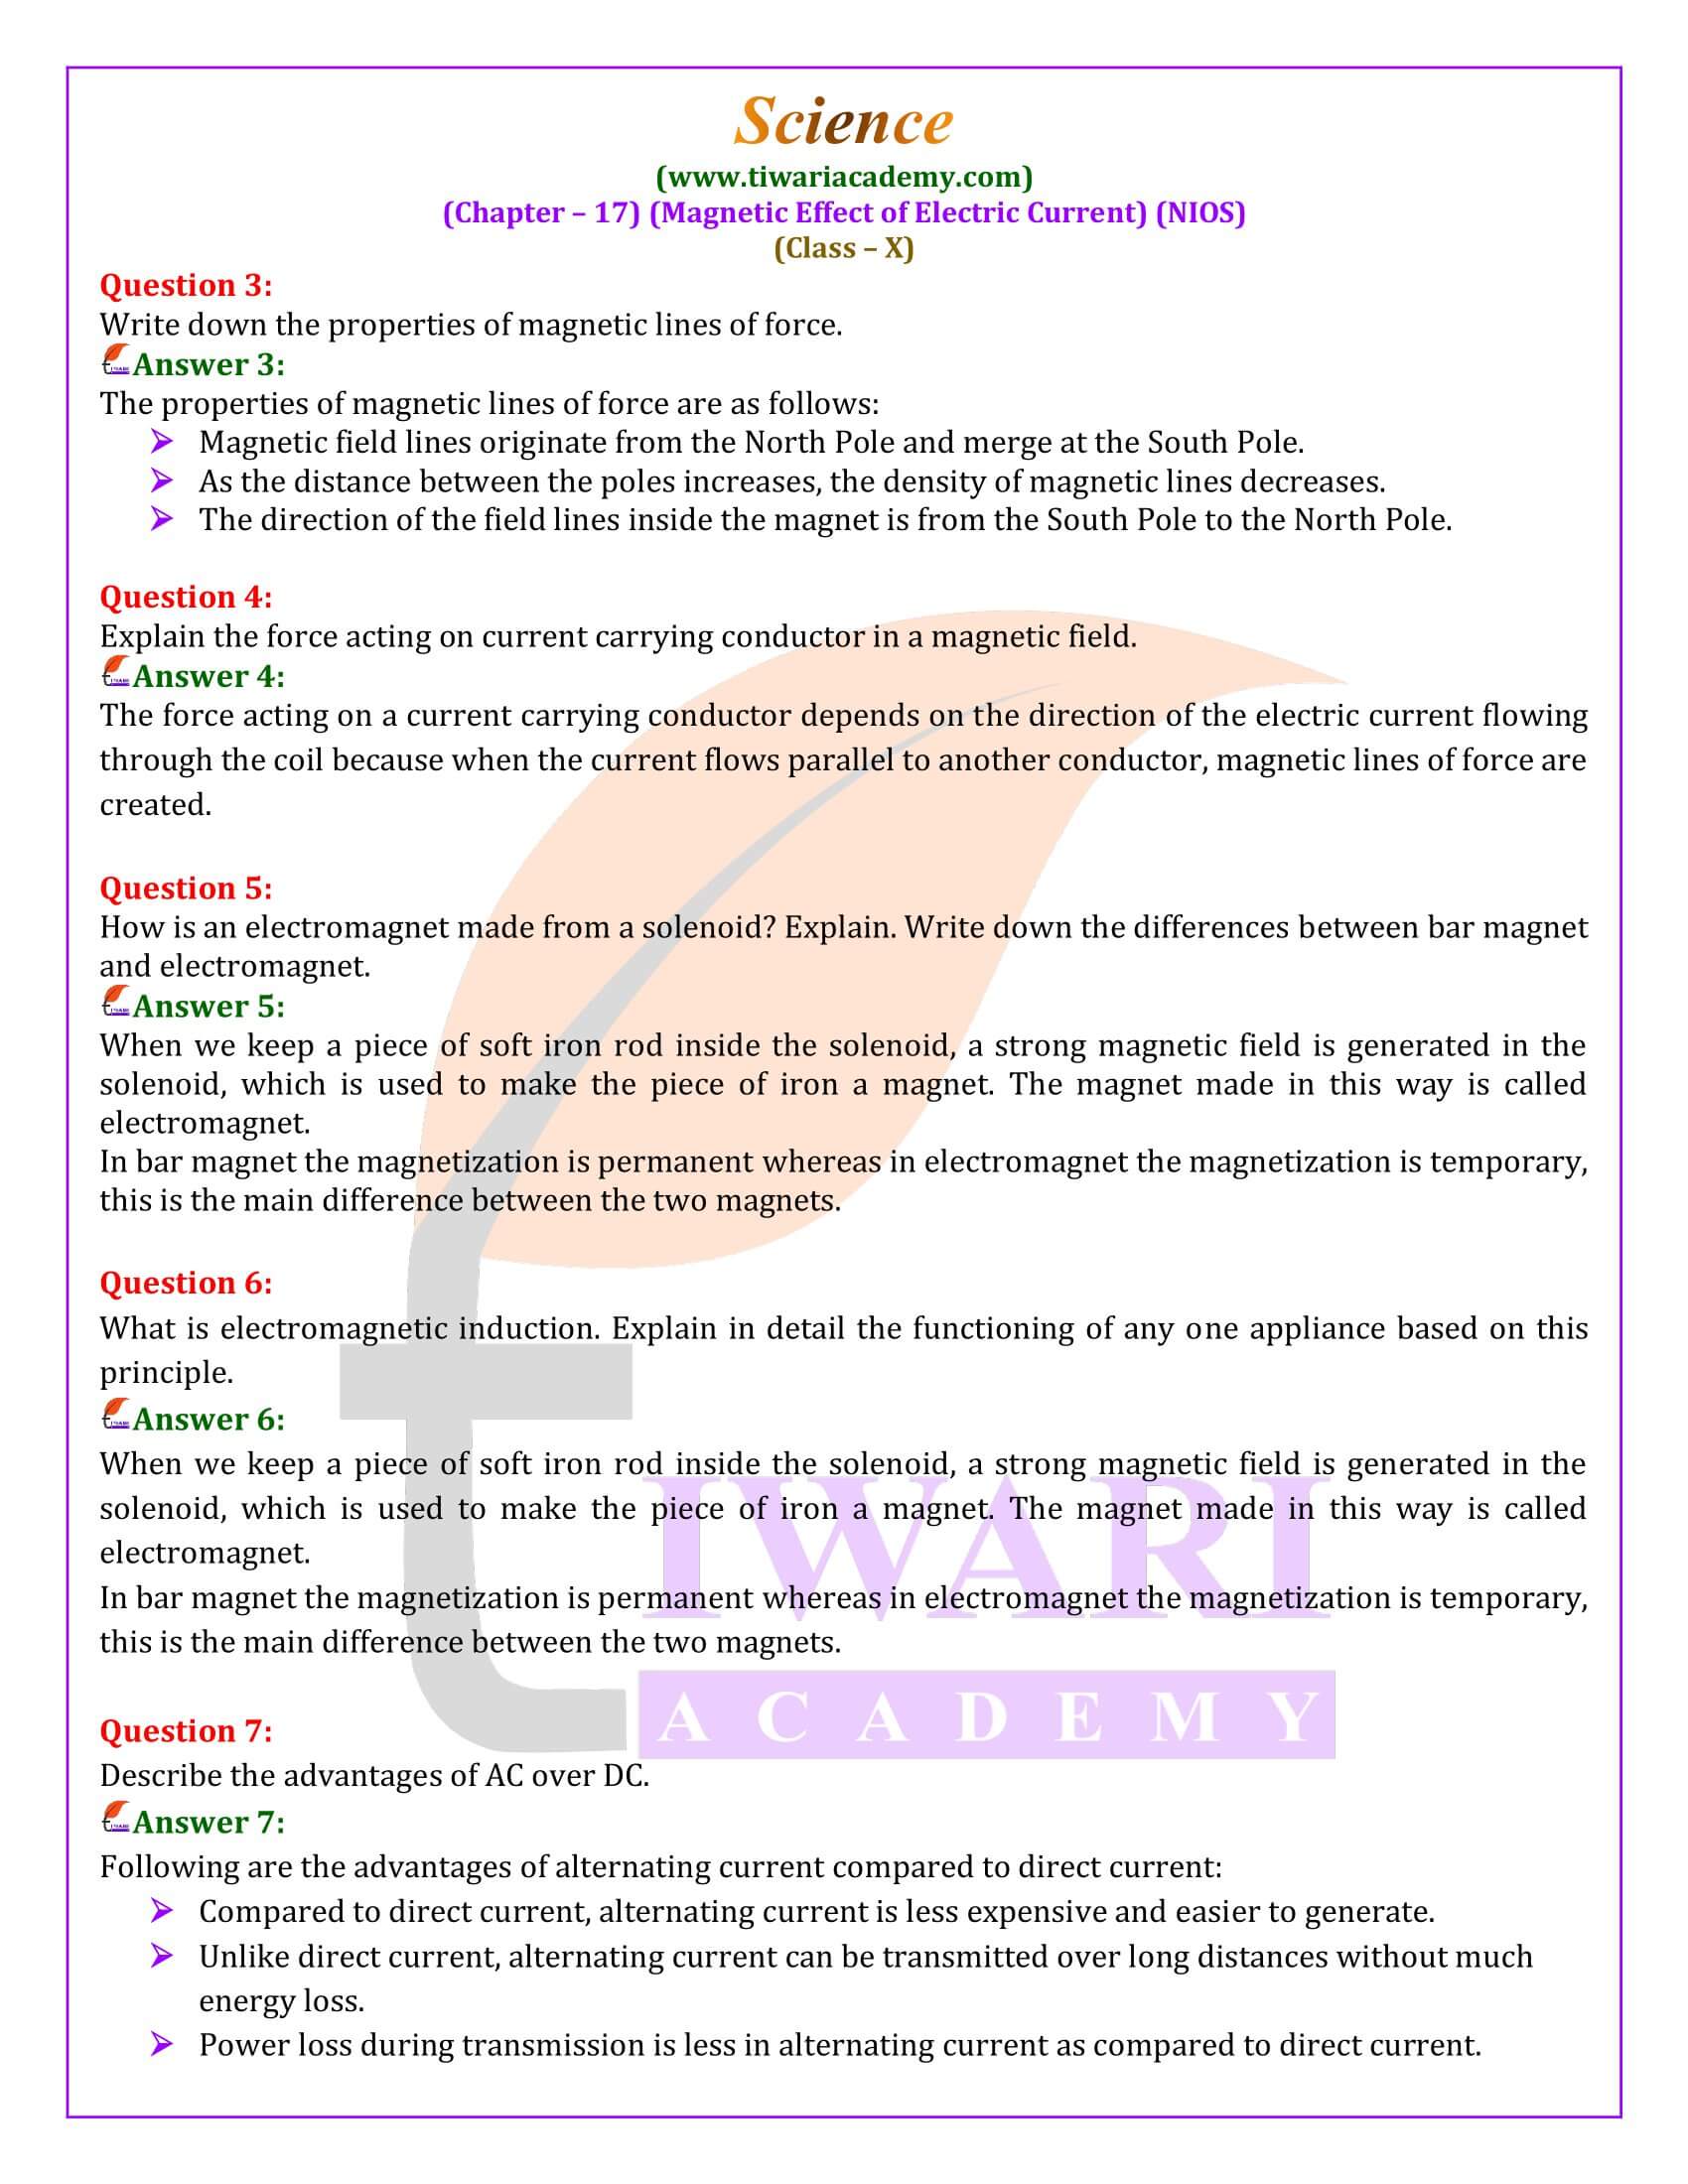 NIOS Class 10 Science Chapter 17 Exercises